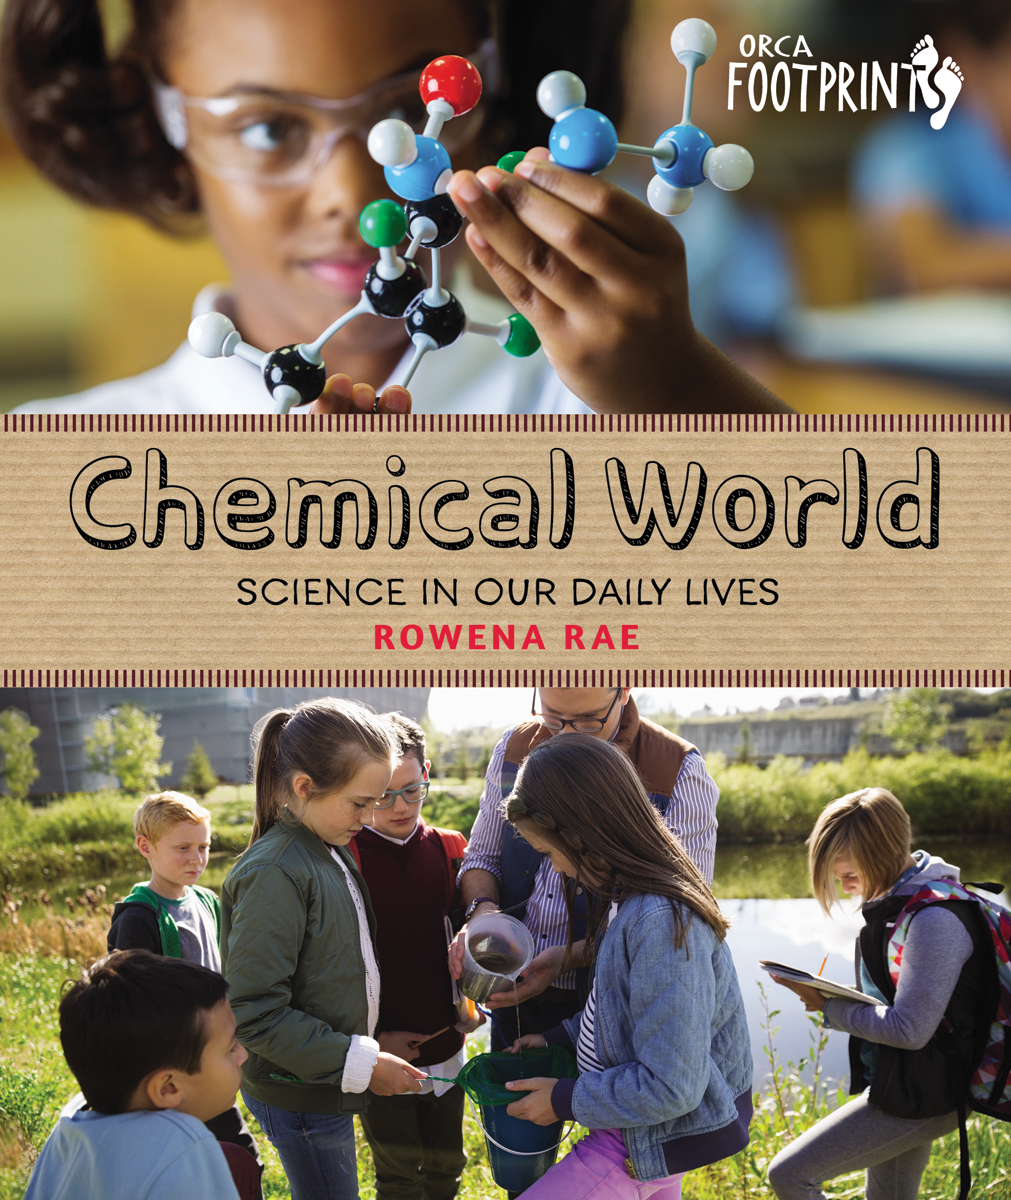 Science in our lives. Кутепова the World of Chemistry. Кемикал ворлд. Blur Chemical World. Кемикал ворлд статуэтки.